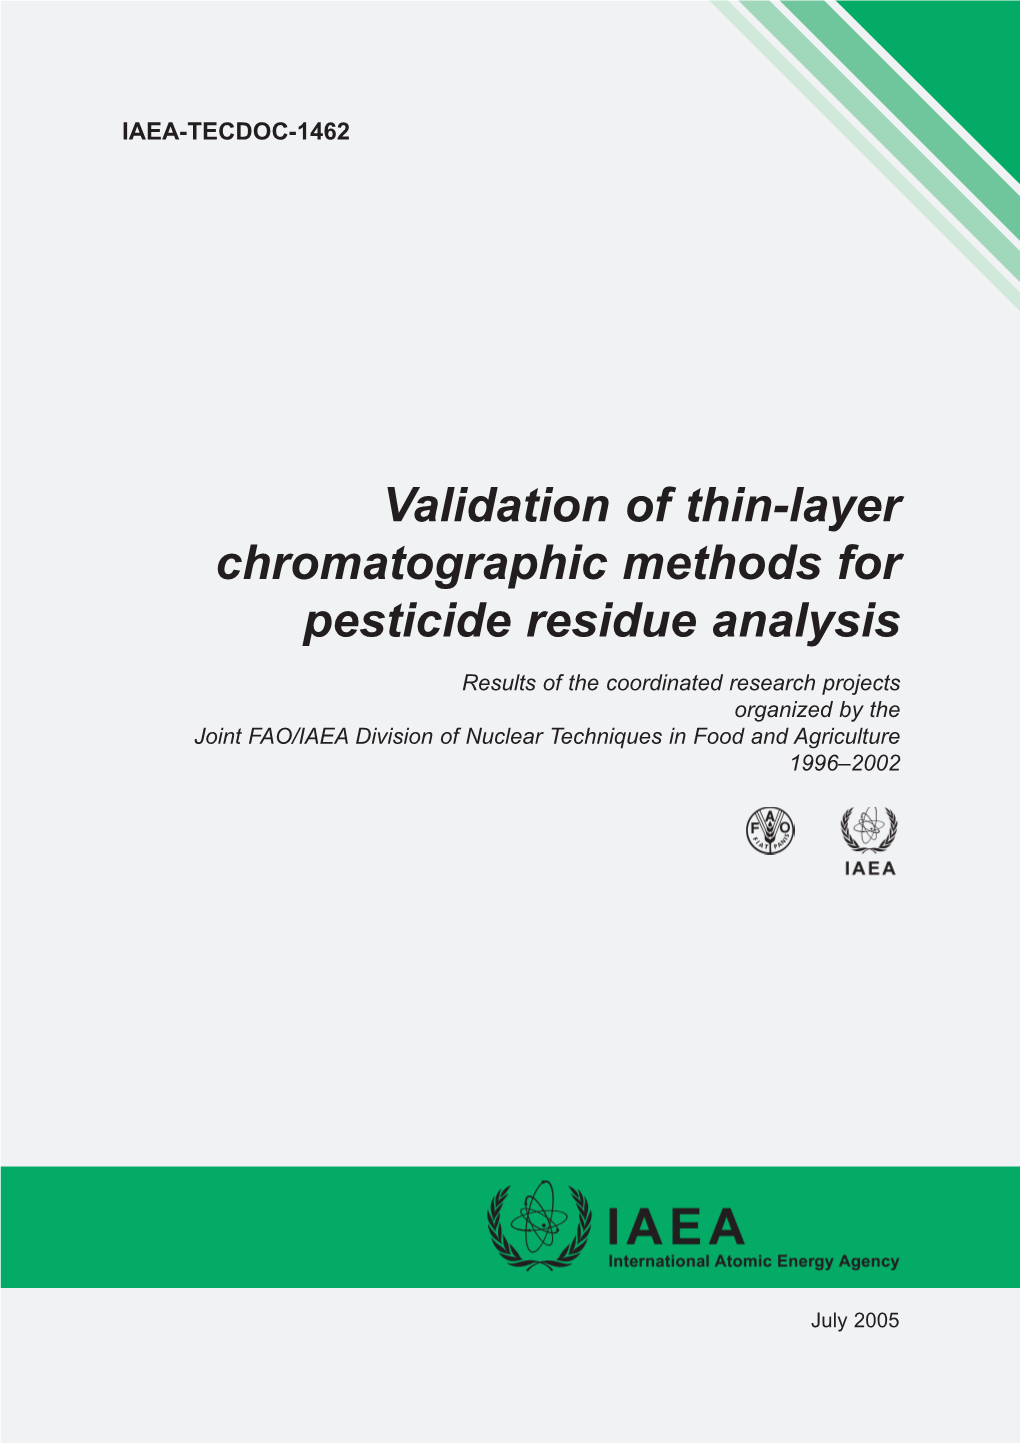 Validation of Thin-Layer Chromatographic Methods for Pesticide Residue Analysis